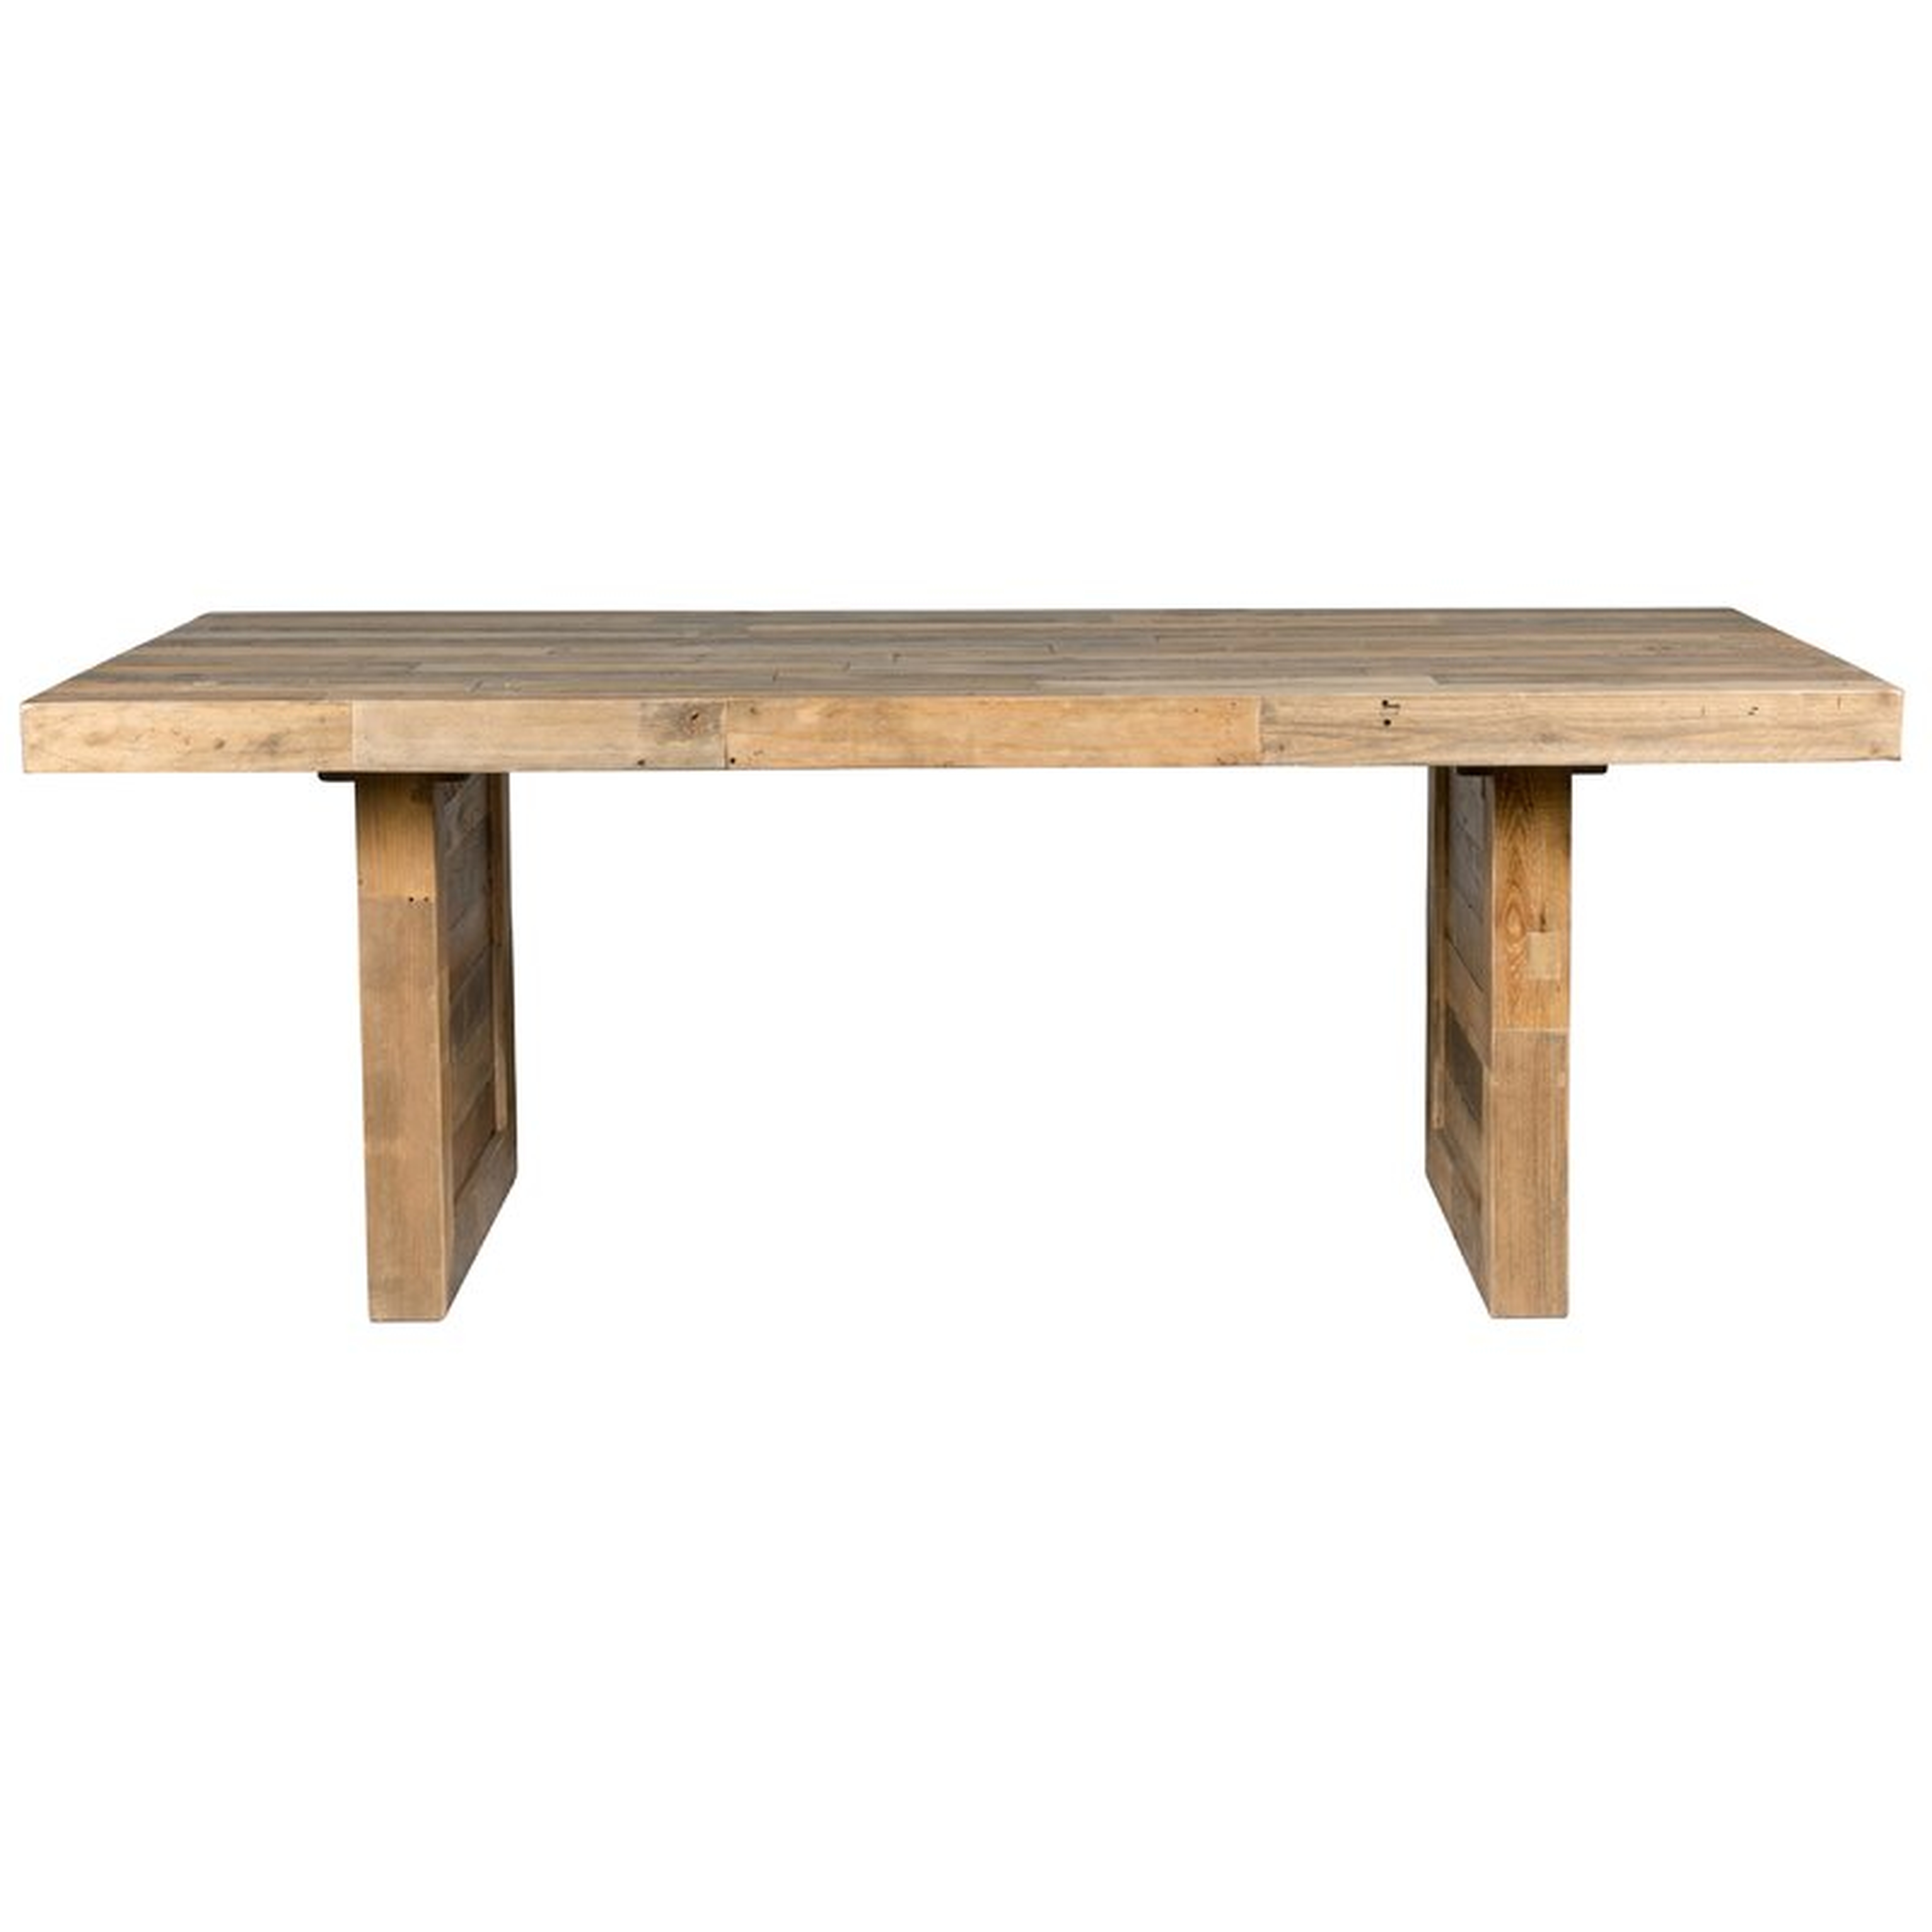 Norman Dining Table - Perigold